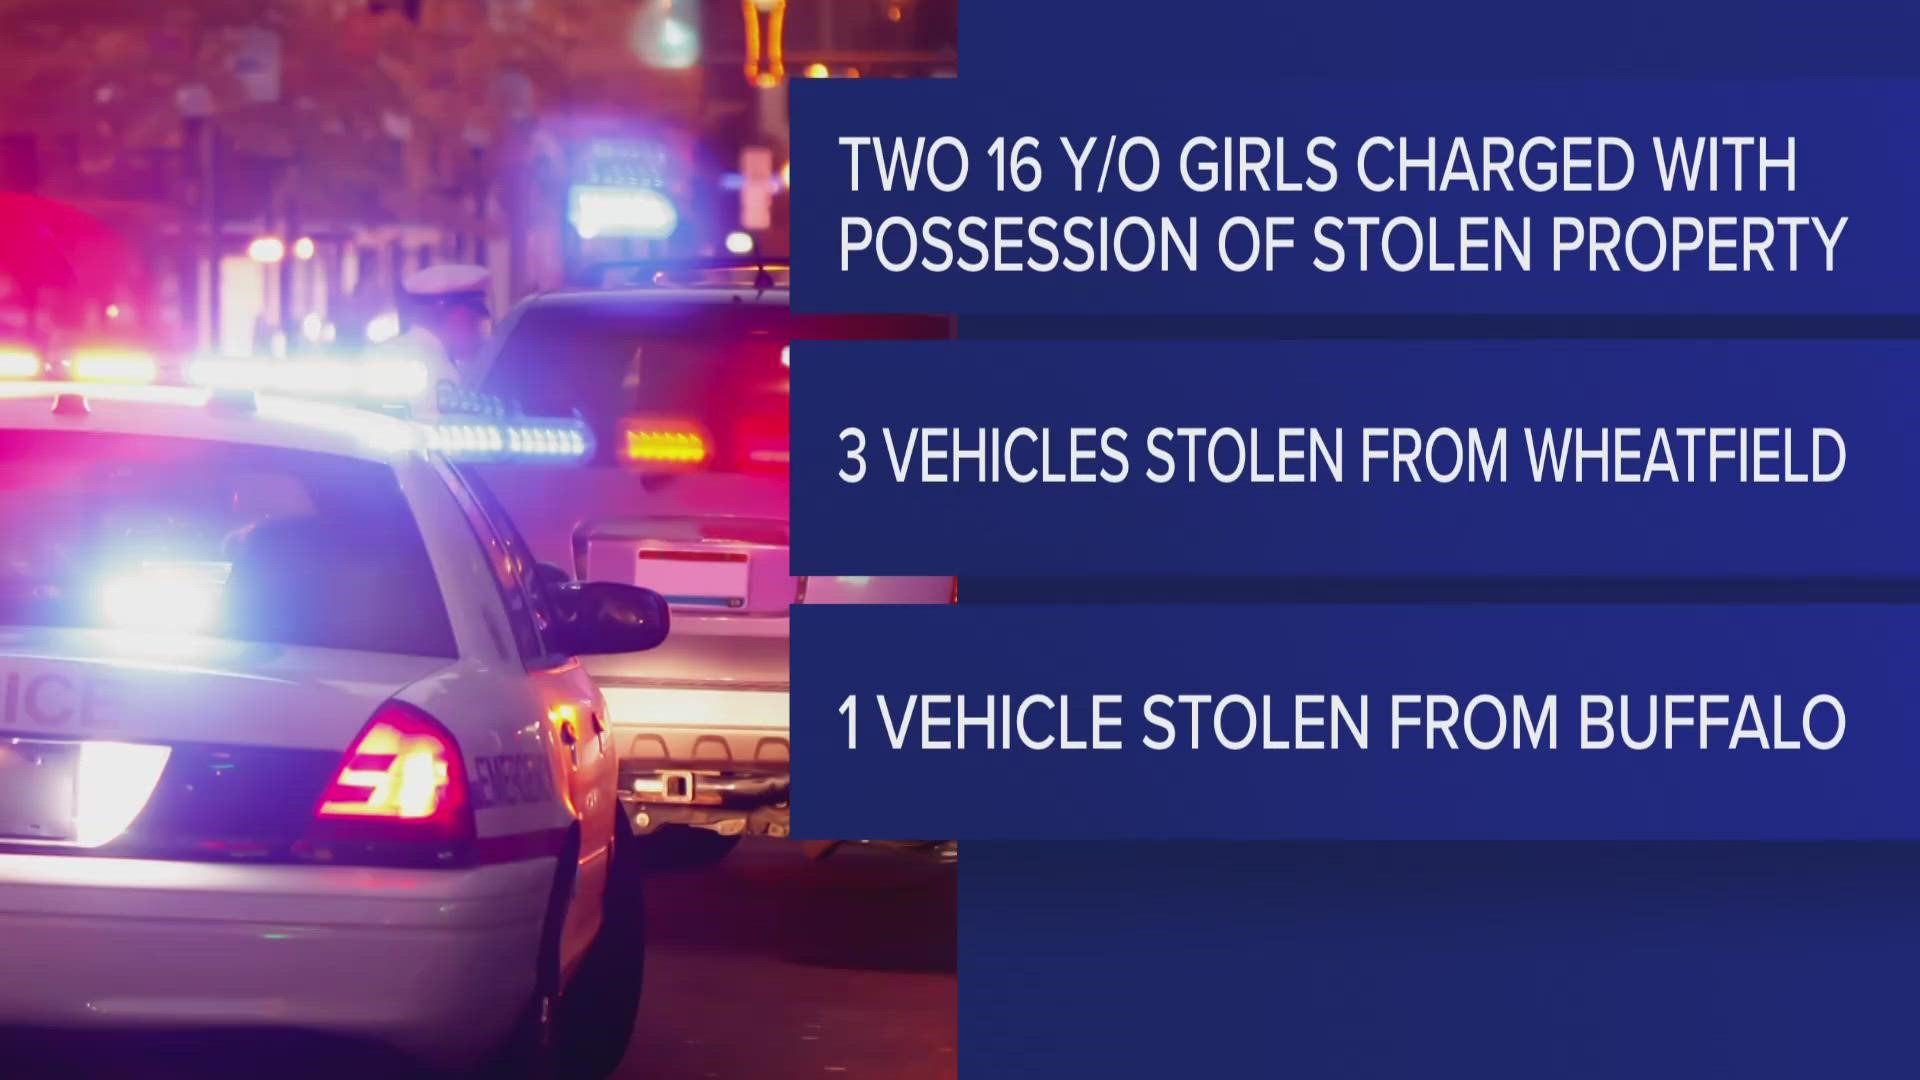 Two 16-year-old girls are facing felony charges after allegedly stealing multiple vehicles.